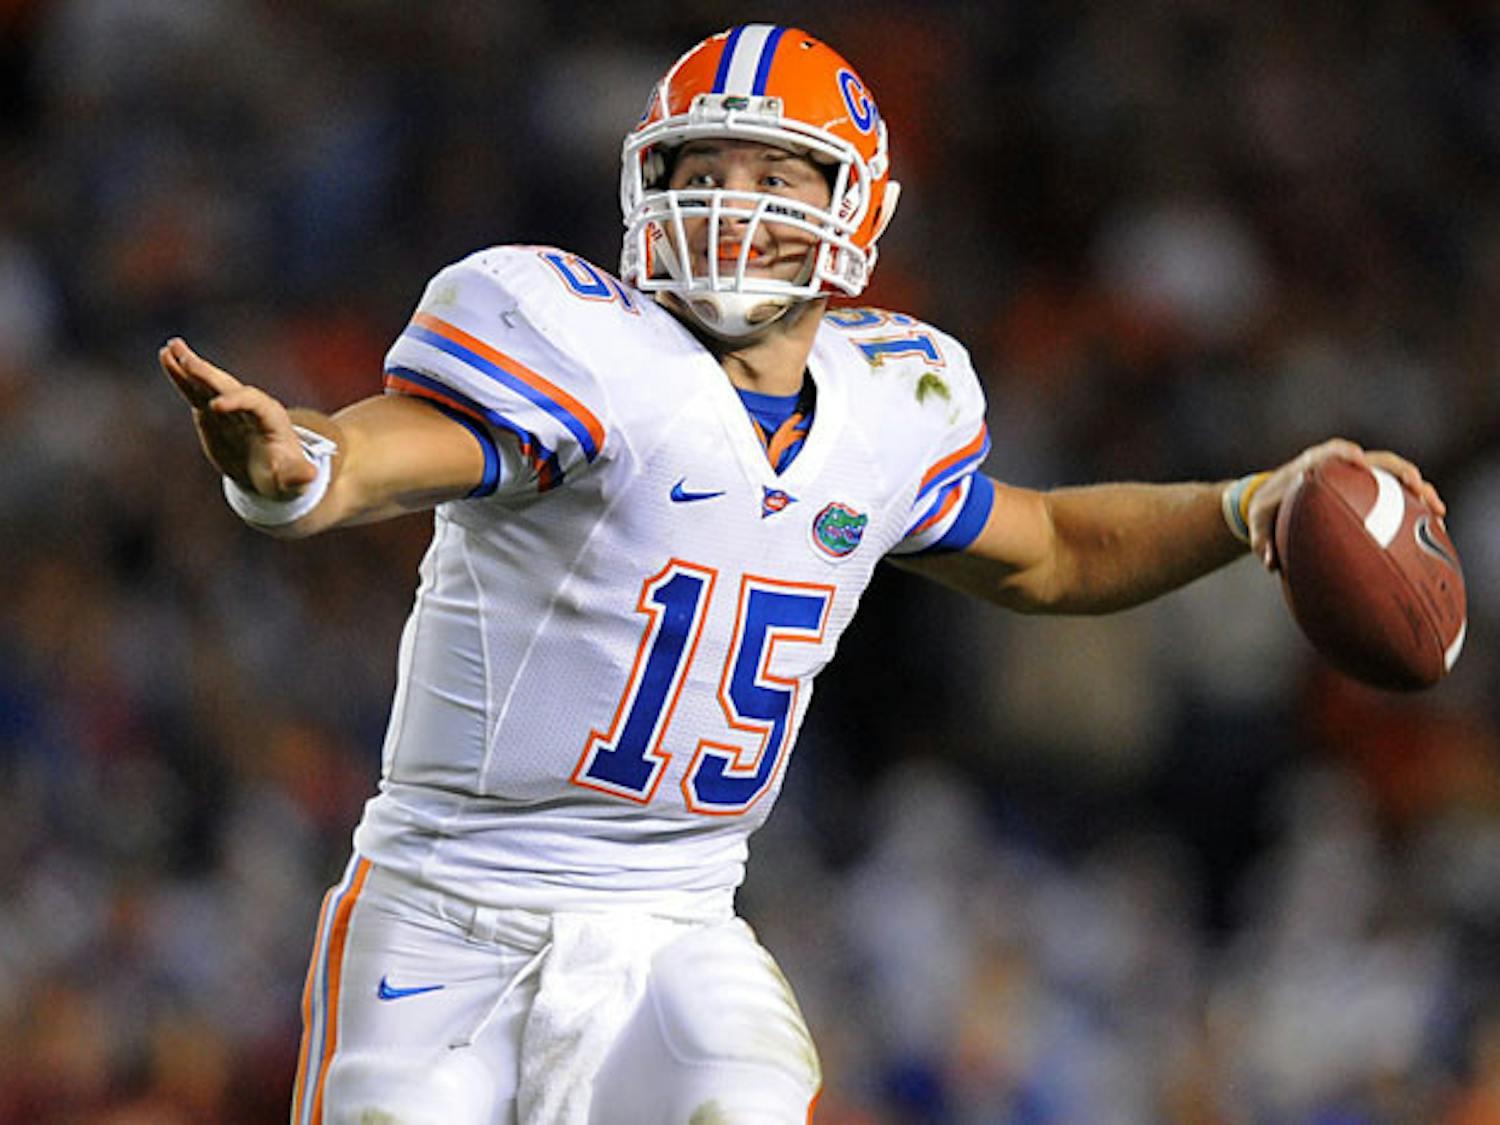 Former Florida quarterback Tim Tebow was listed on the College Football Hall of Fame ballot Monday.